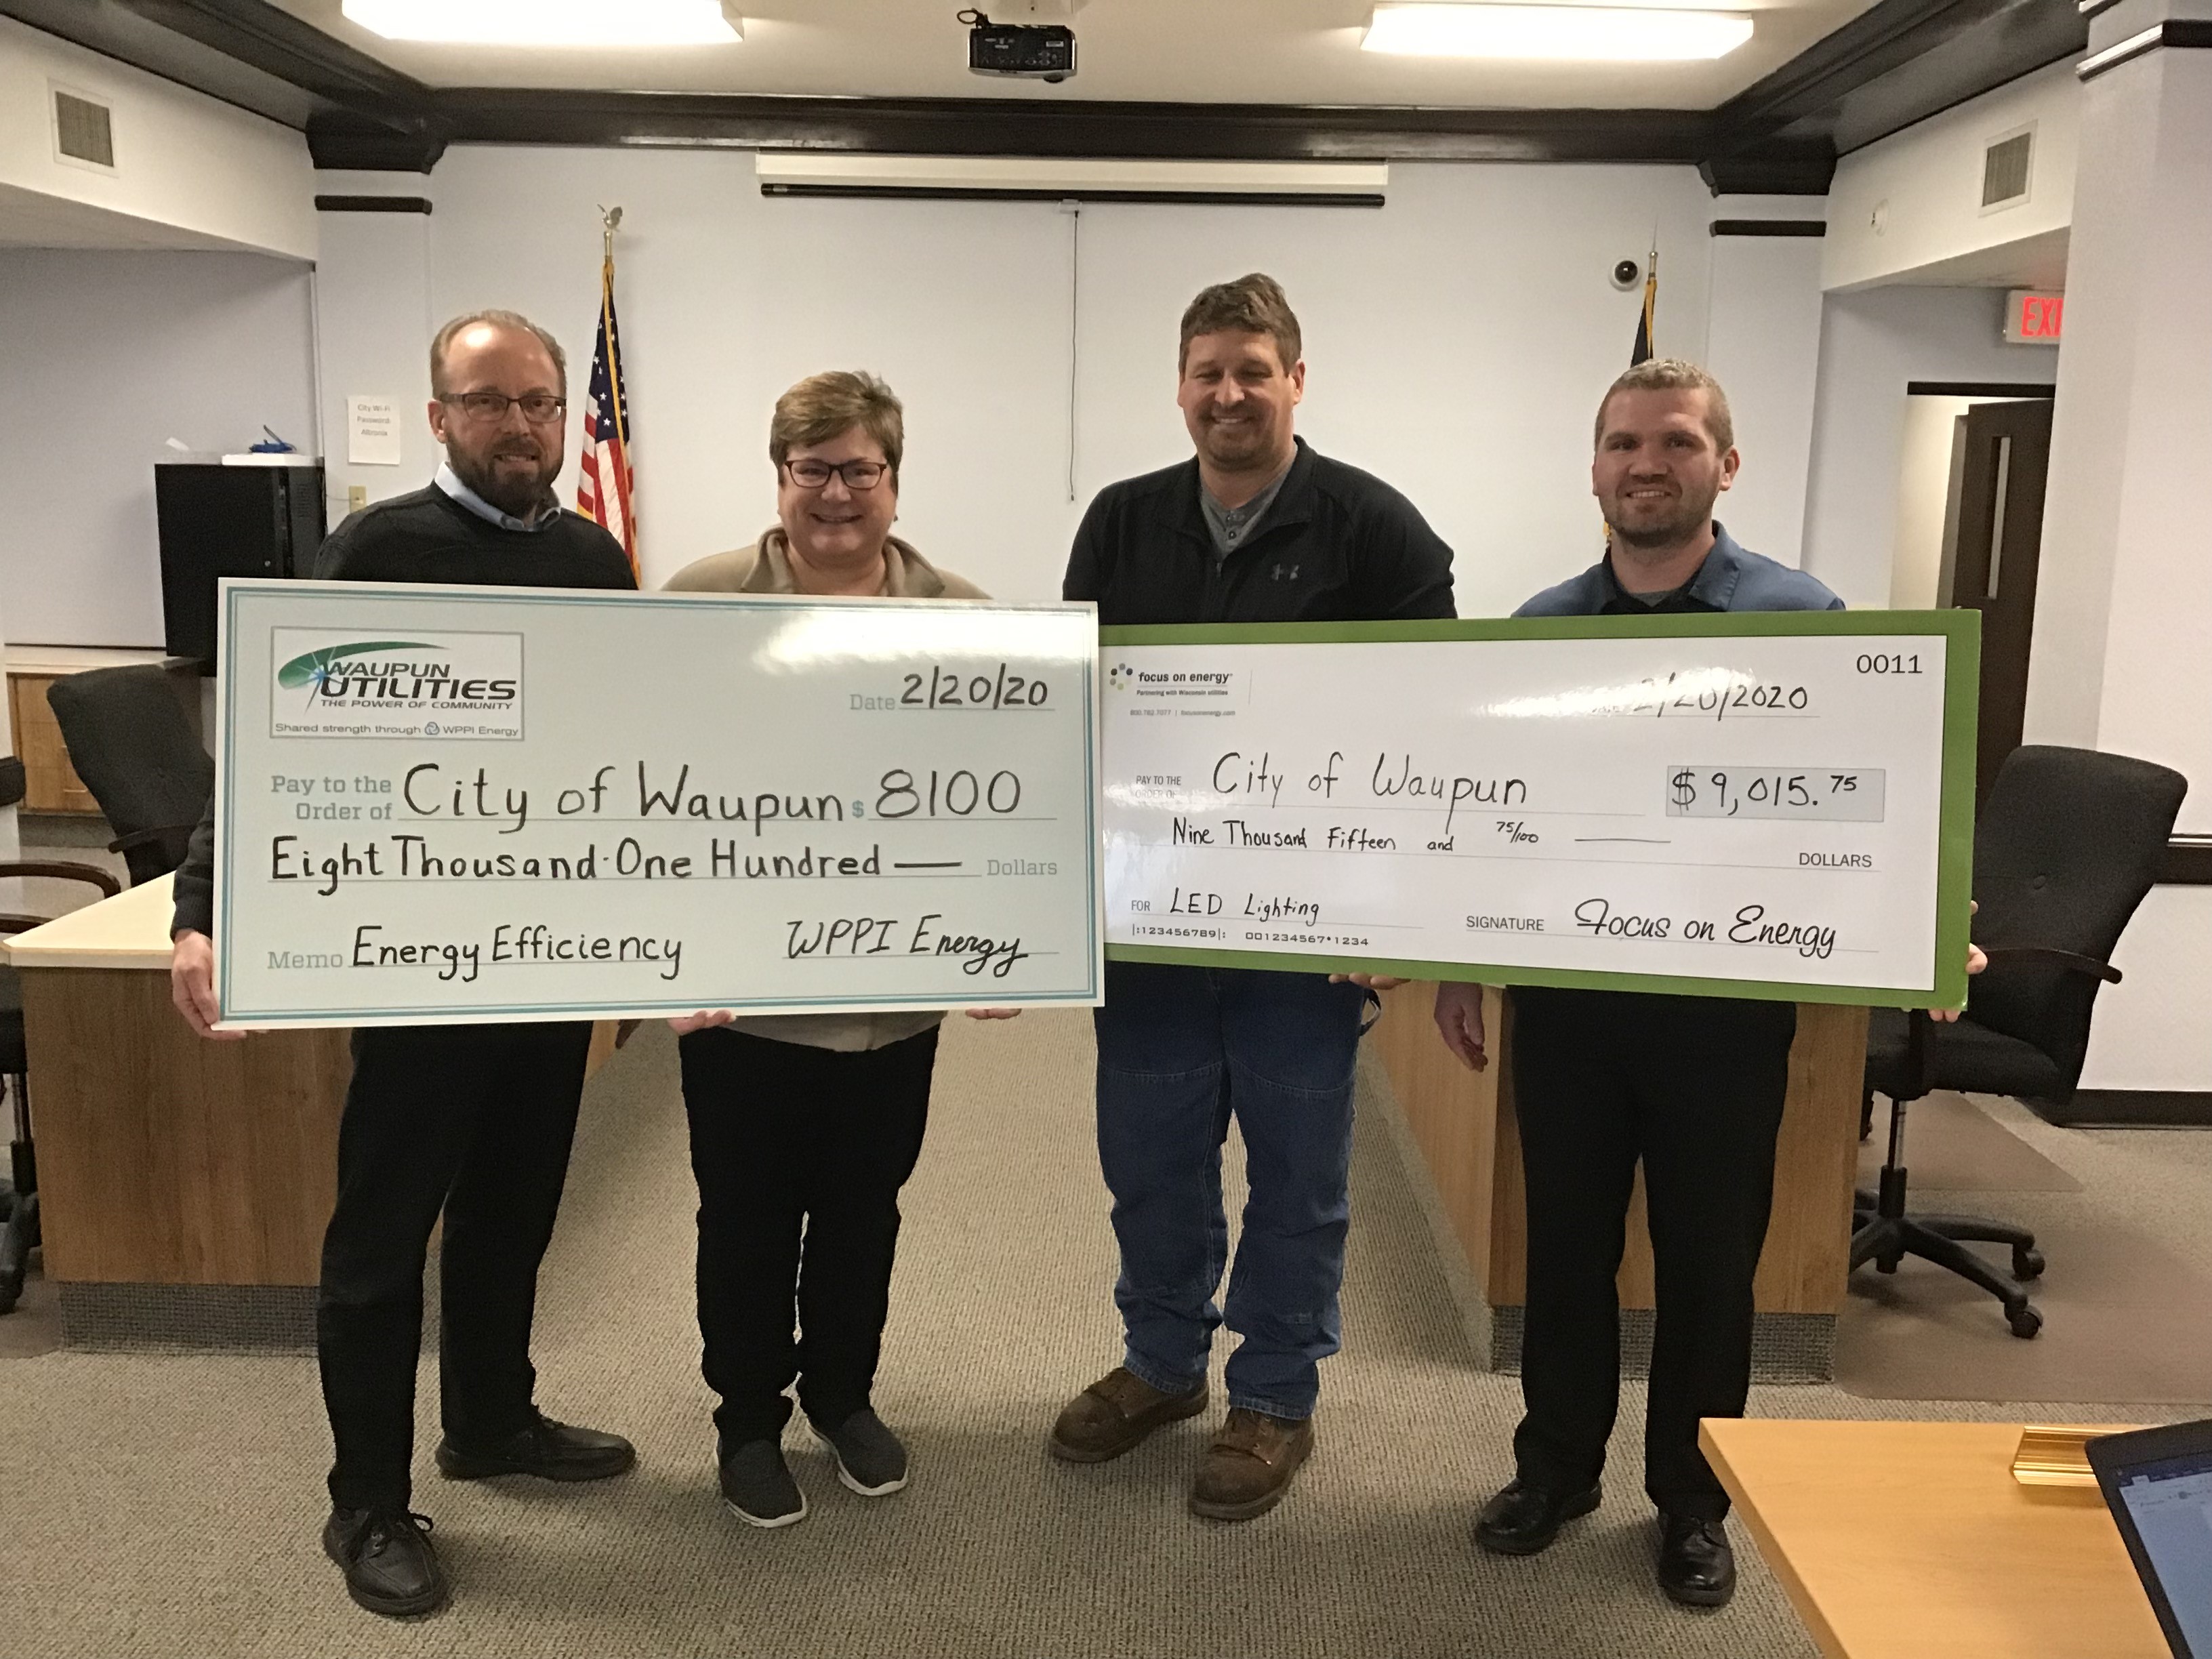 Waupun Mayor Julia Nickel and City Director of Public Works Jeff Daane accept financial incentive checks from Eric Kostecki with WPPI Energy and Joe Kottwitz of Focus on Energy